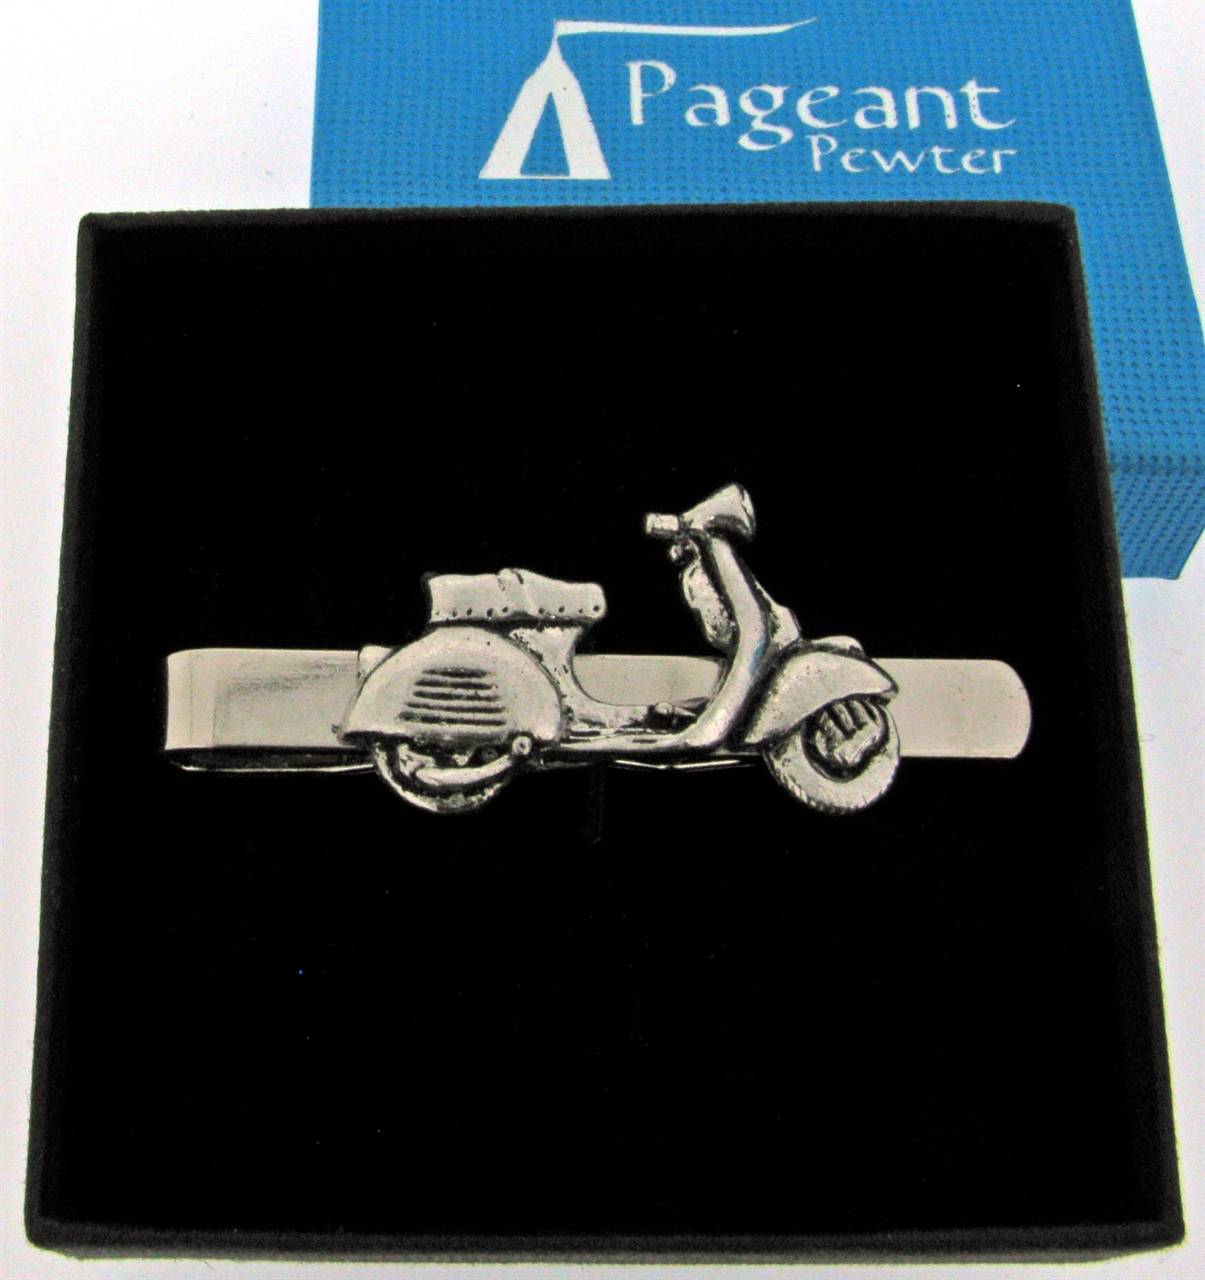 Scooter V Tie Clip - high quality pewter gifts from Pageant Pewter